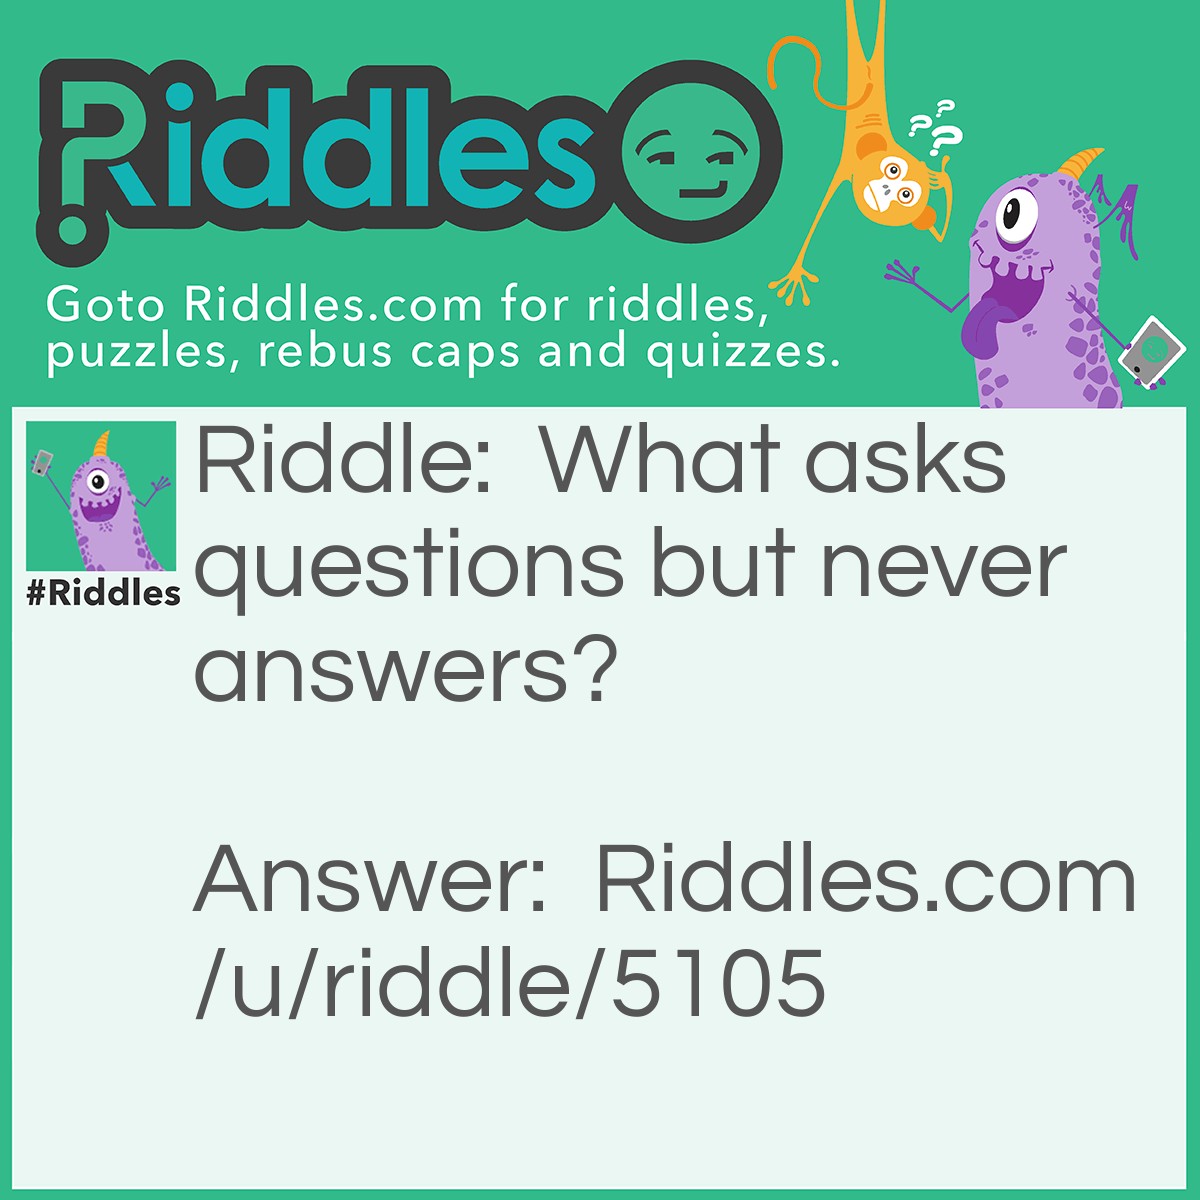 Riddle: What asks questions but never answers? Answer: An Owl.